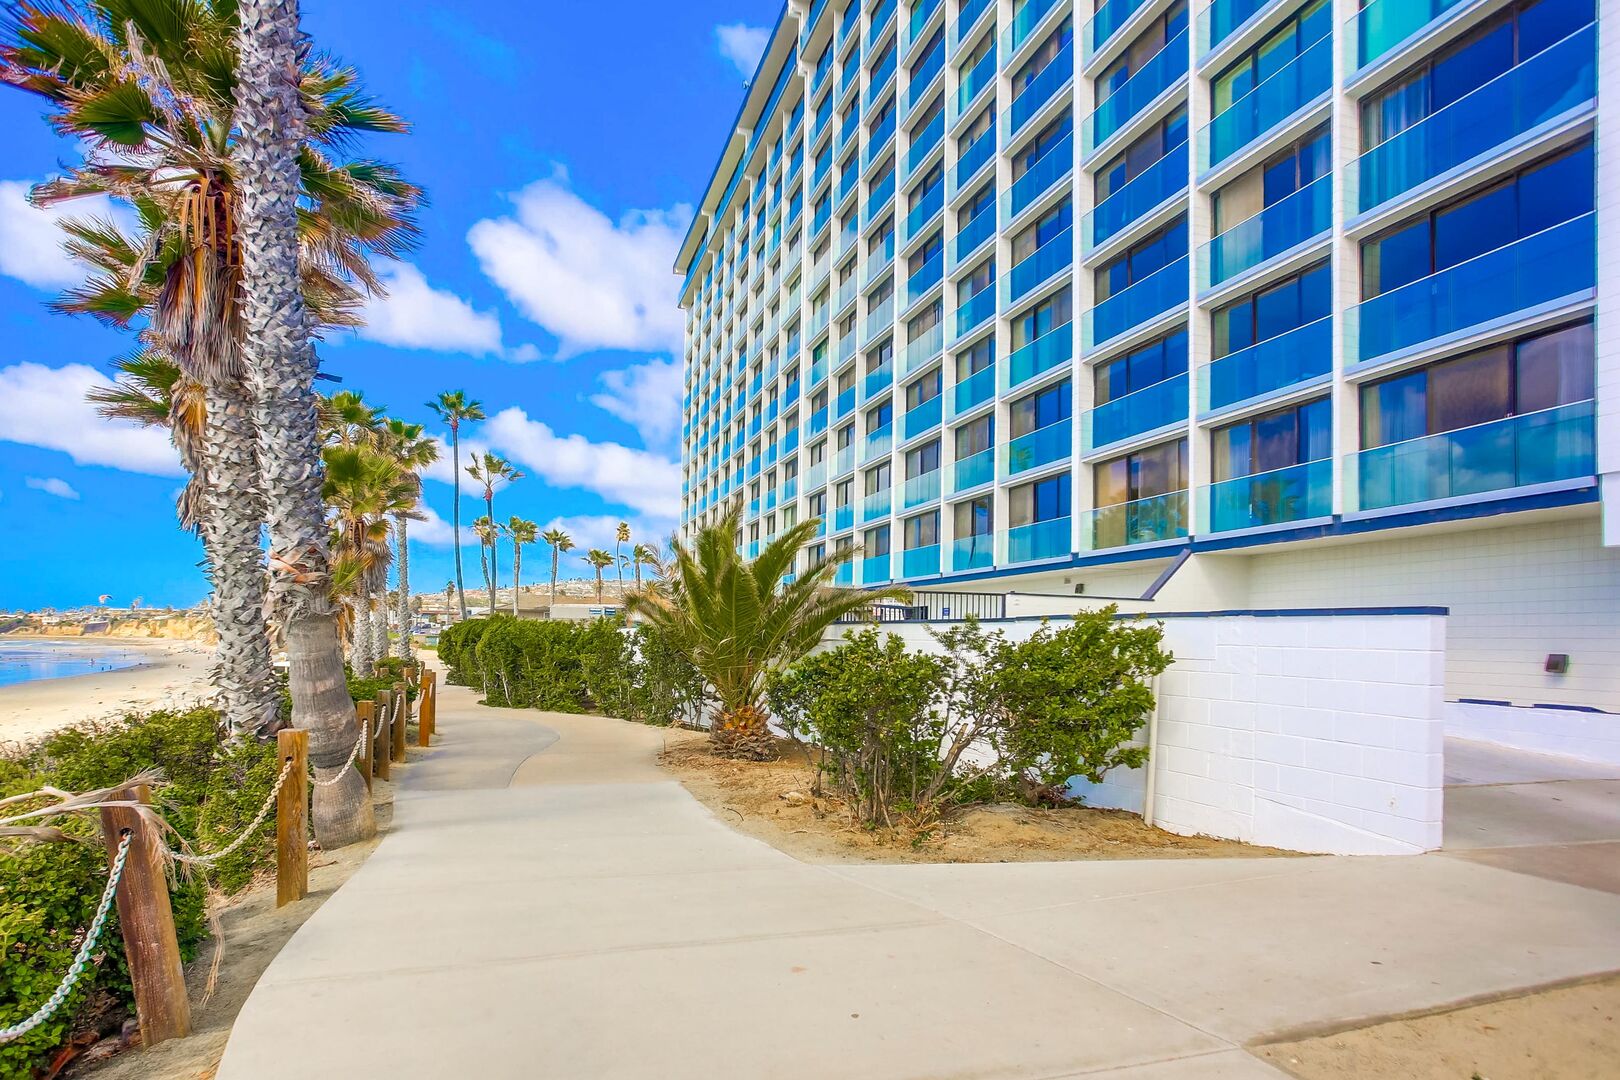 Capri by the Sea with boardwalk and beach access right outside the lobby! Each guest has 1 reserved parking space in the gated garage - a luxury at the beach!